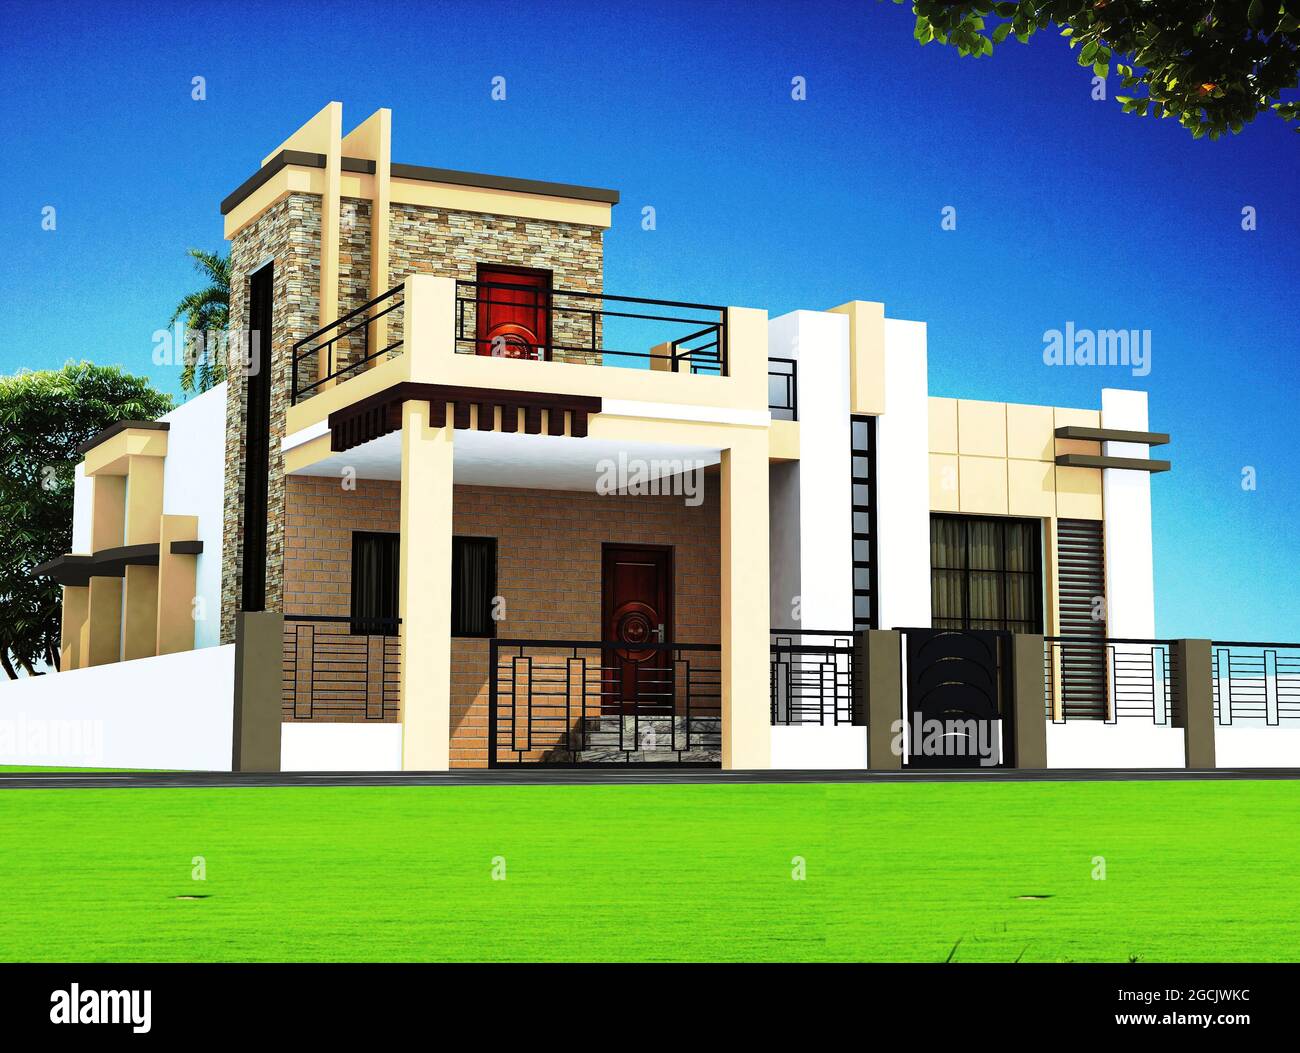 3D rendering of a duplex house with an abstract exterior design ...